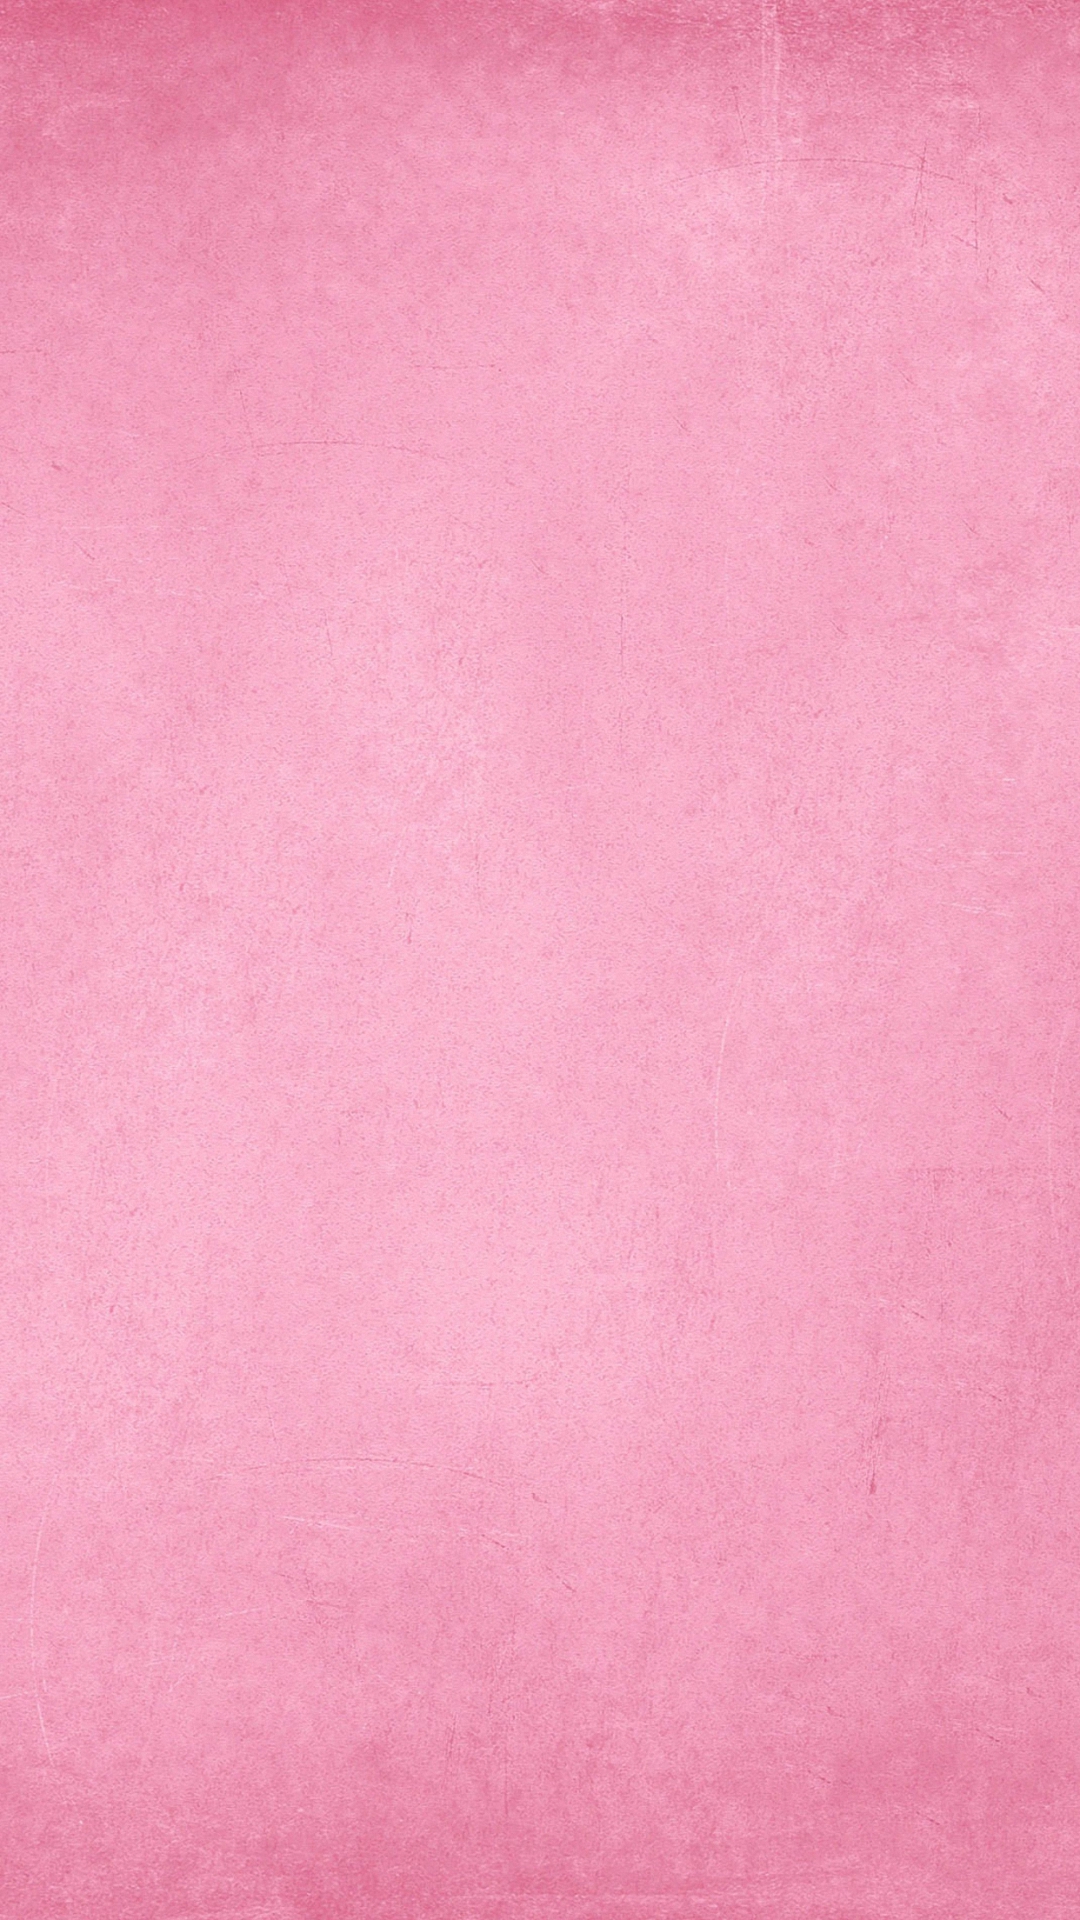 HD Cool Pink Iphone Background.